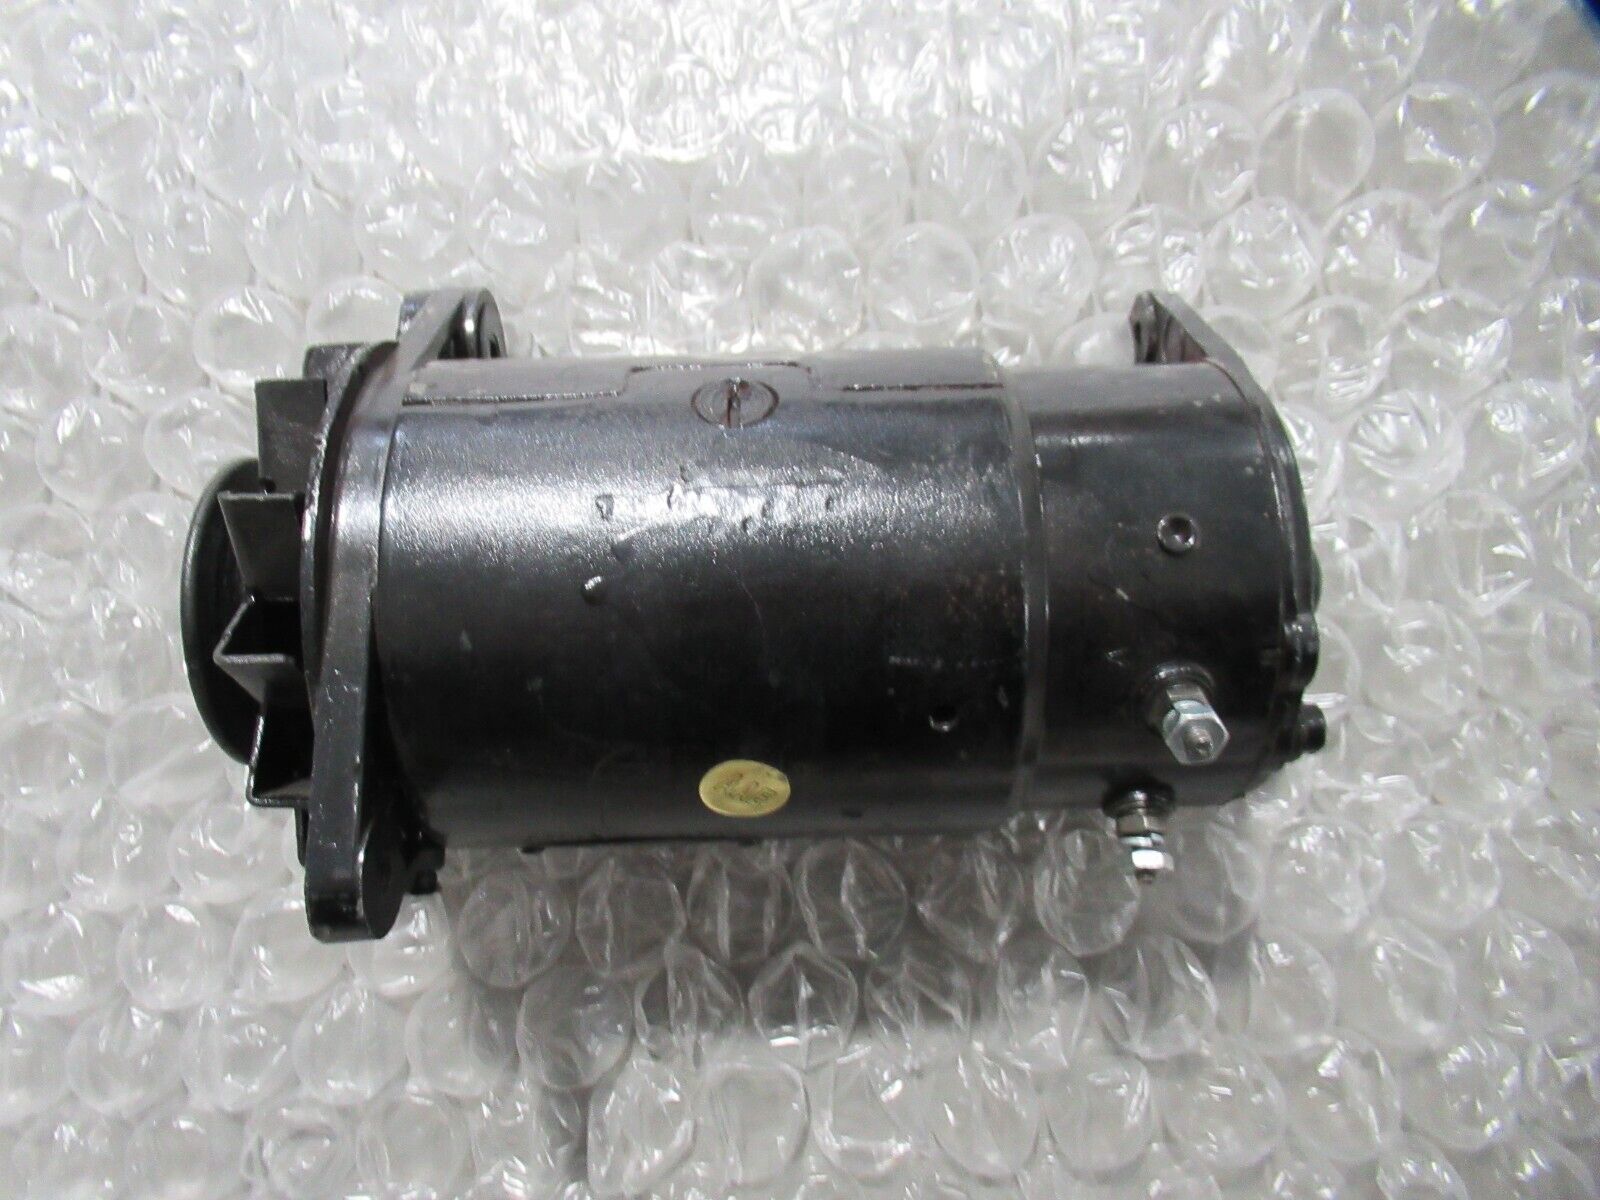 Vintage 1956-1961 Chevrolet Buick Generator Part Number 1102097 3K23 Delco Remy